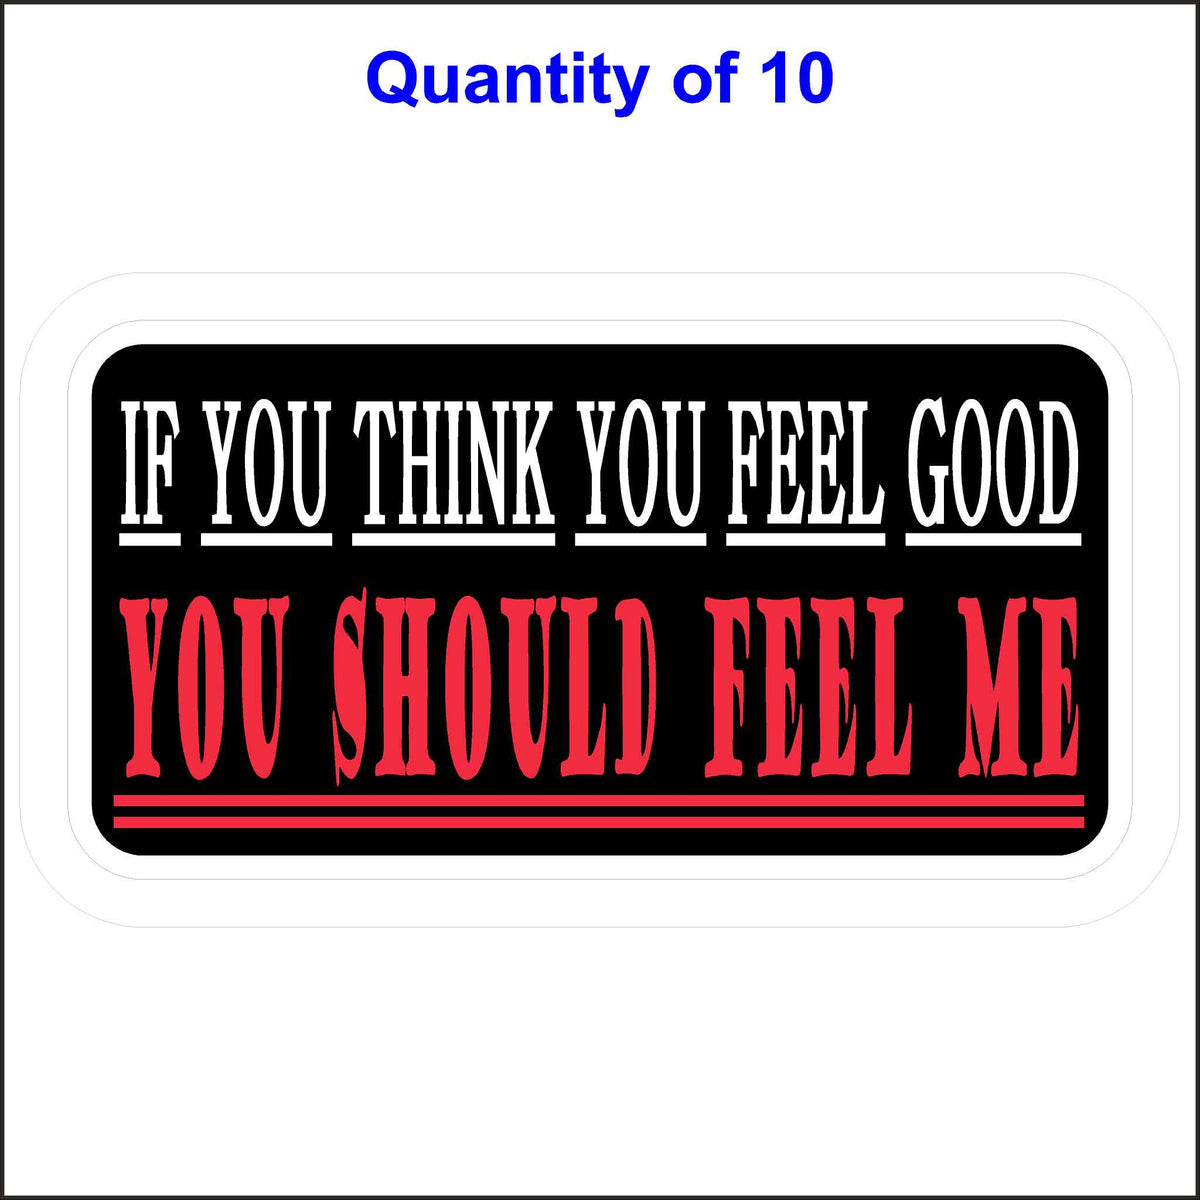 10 Quantity of This If You Think You Feel Good You Should Feel Me Sticker.